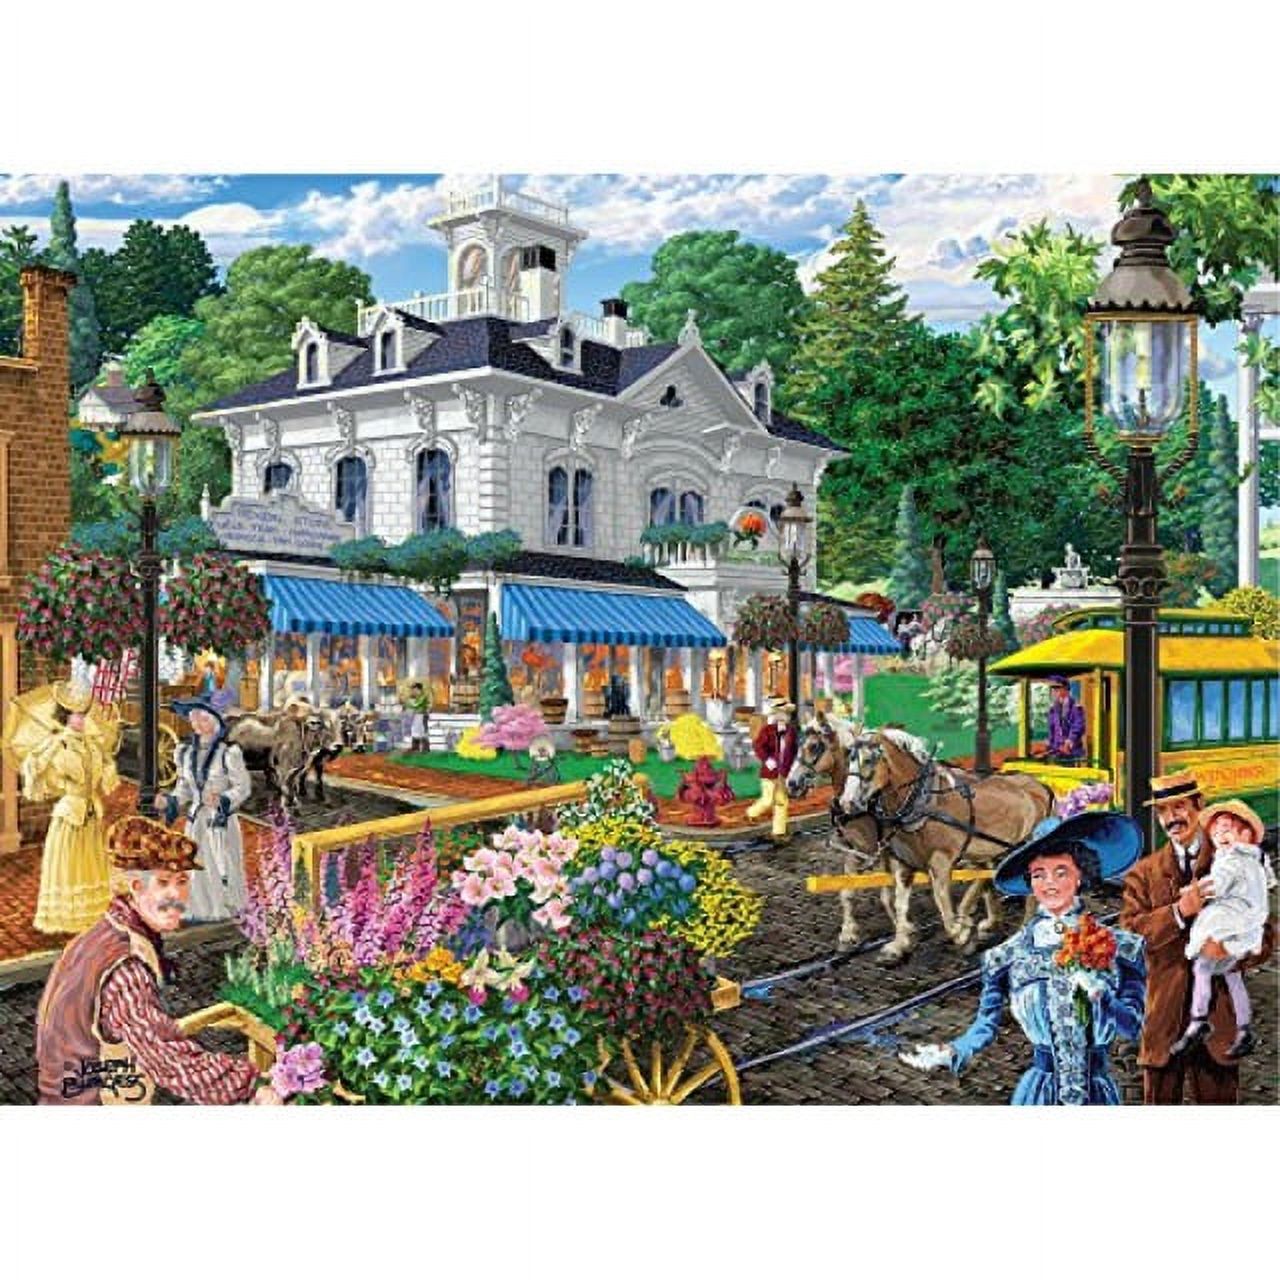 Bits and Pieces - 1500 Piece Jigsaw Puzzle - Victorian Spring, Busy Town Center - by Artist Joseph Burgess - 1500 pc Jigsaw - image 1 of 3